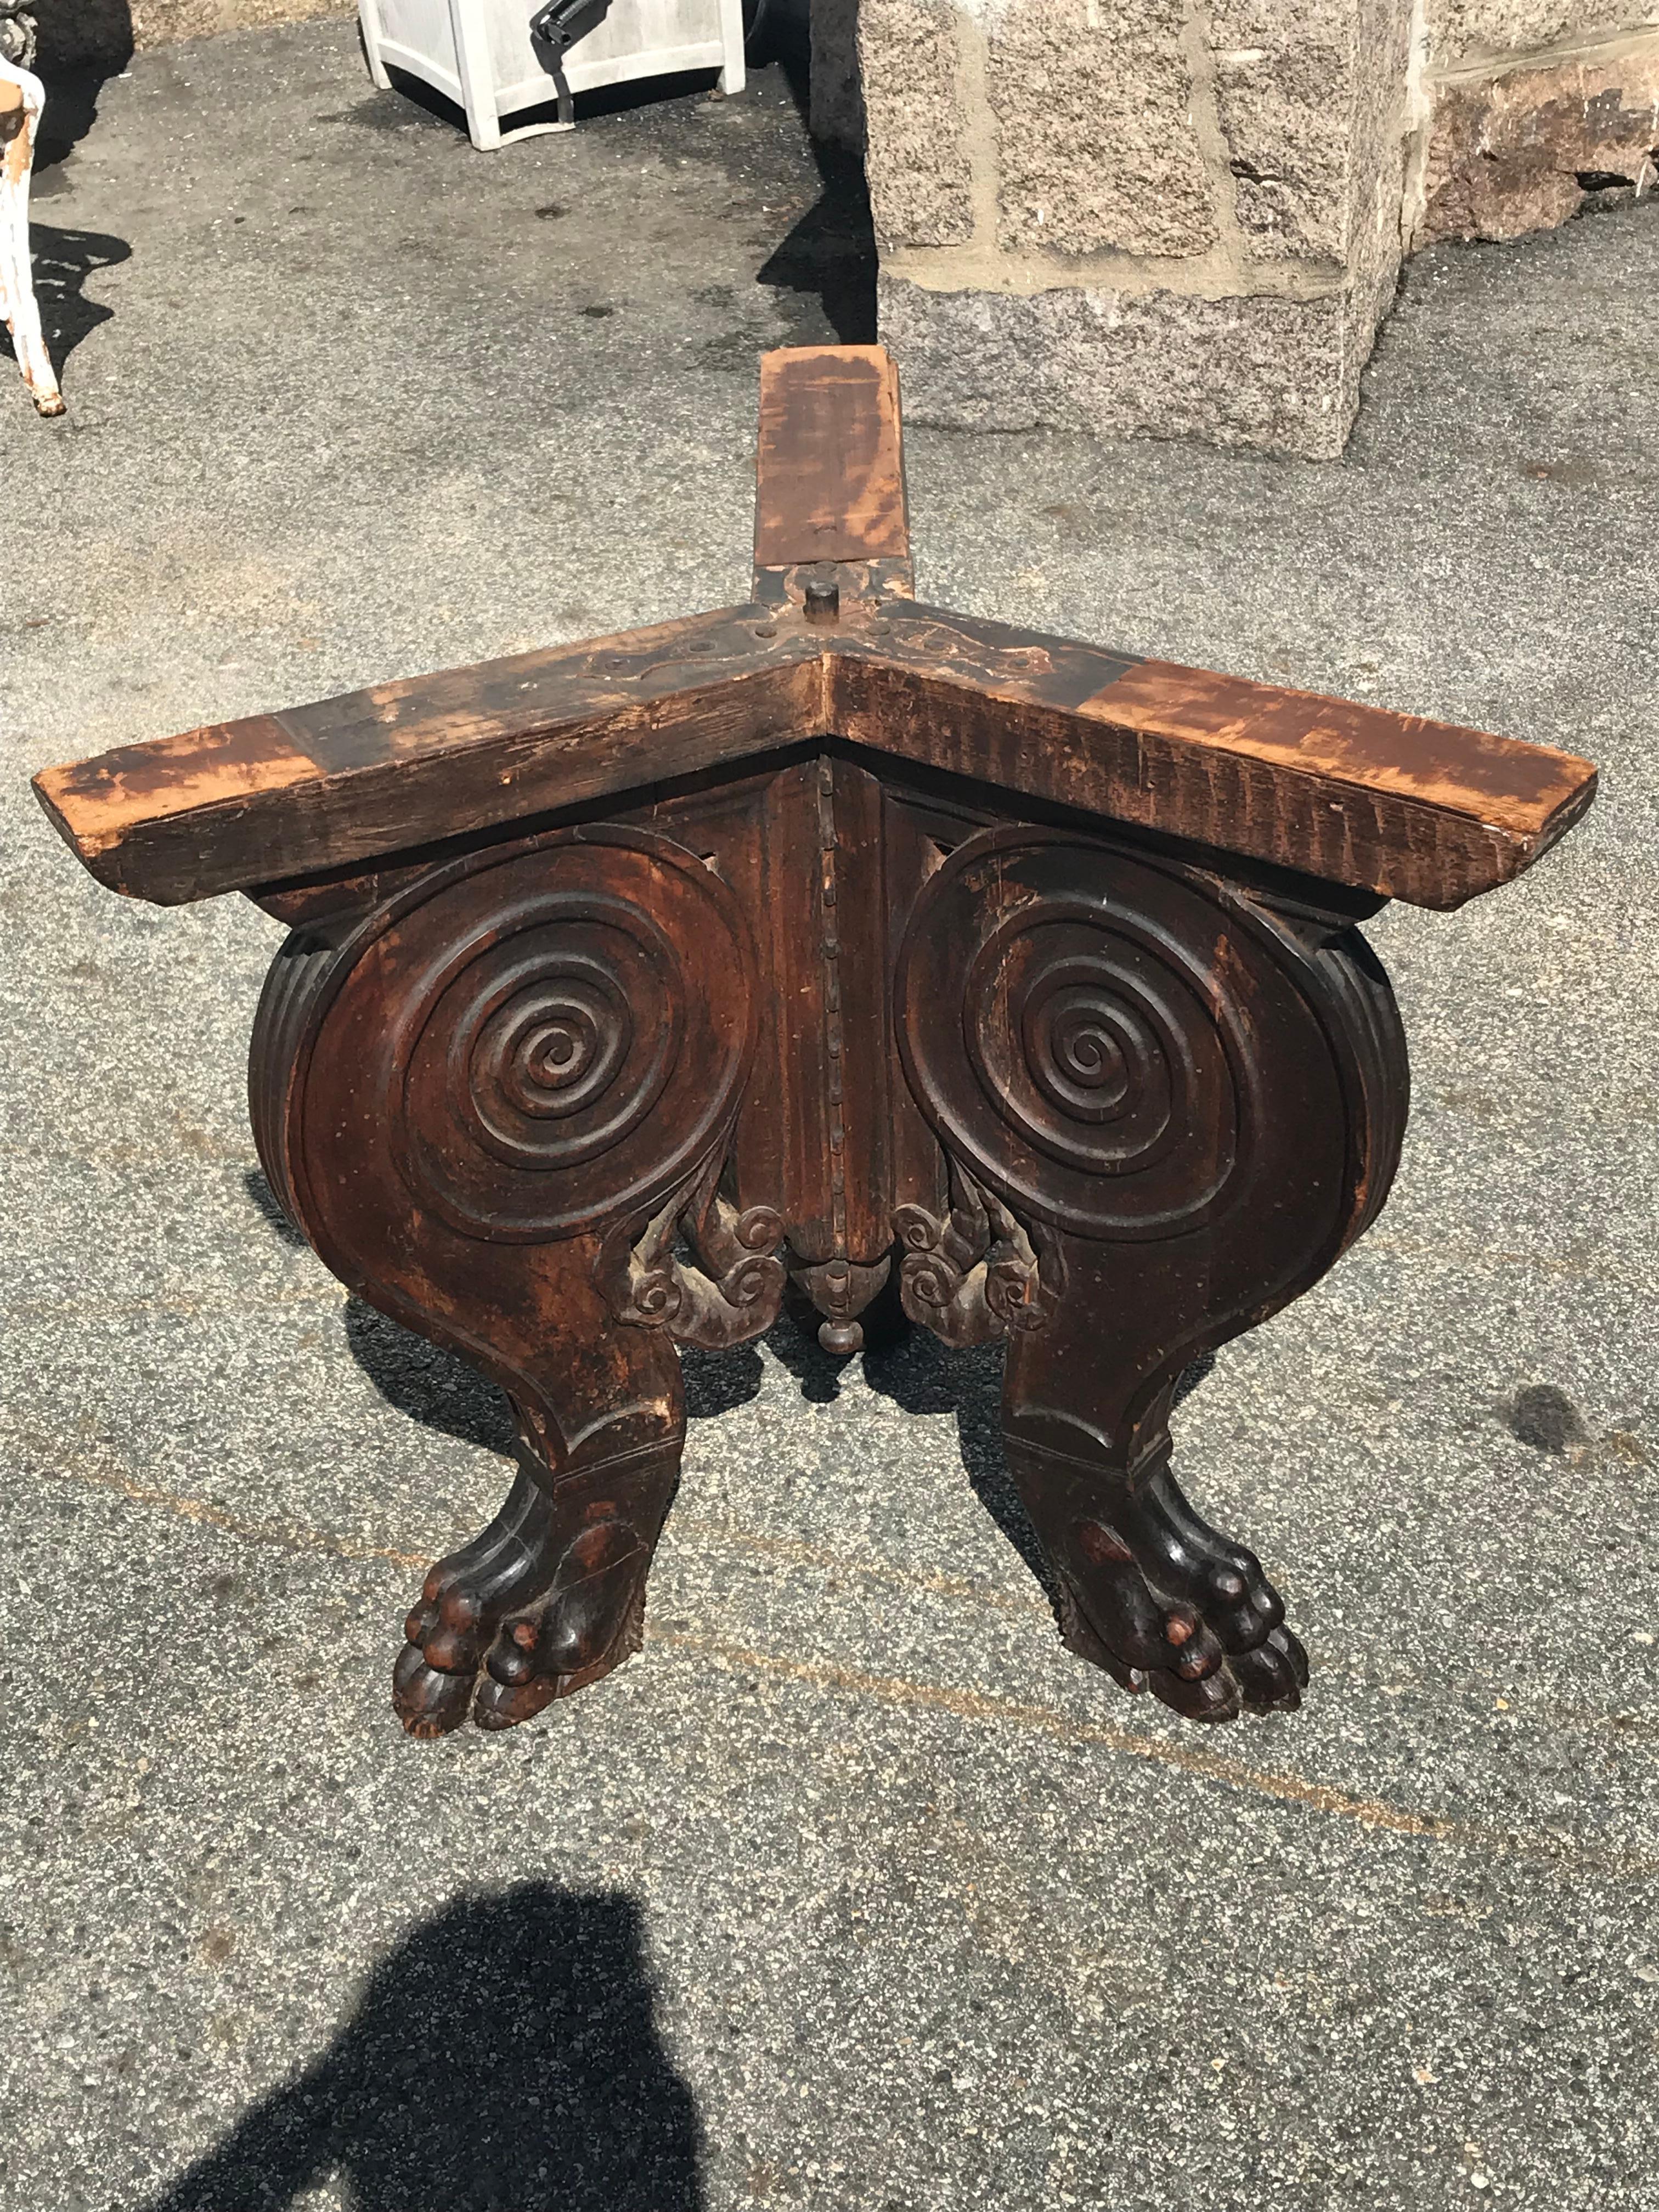 16th or 17th century Italian walnut and mixed woods centre table

Lion paw feet. Tripartate base. Very early finish on base. Great patina. Possible period Renaissance.